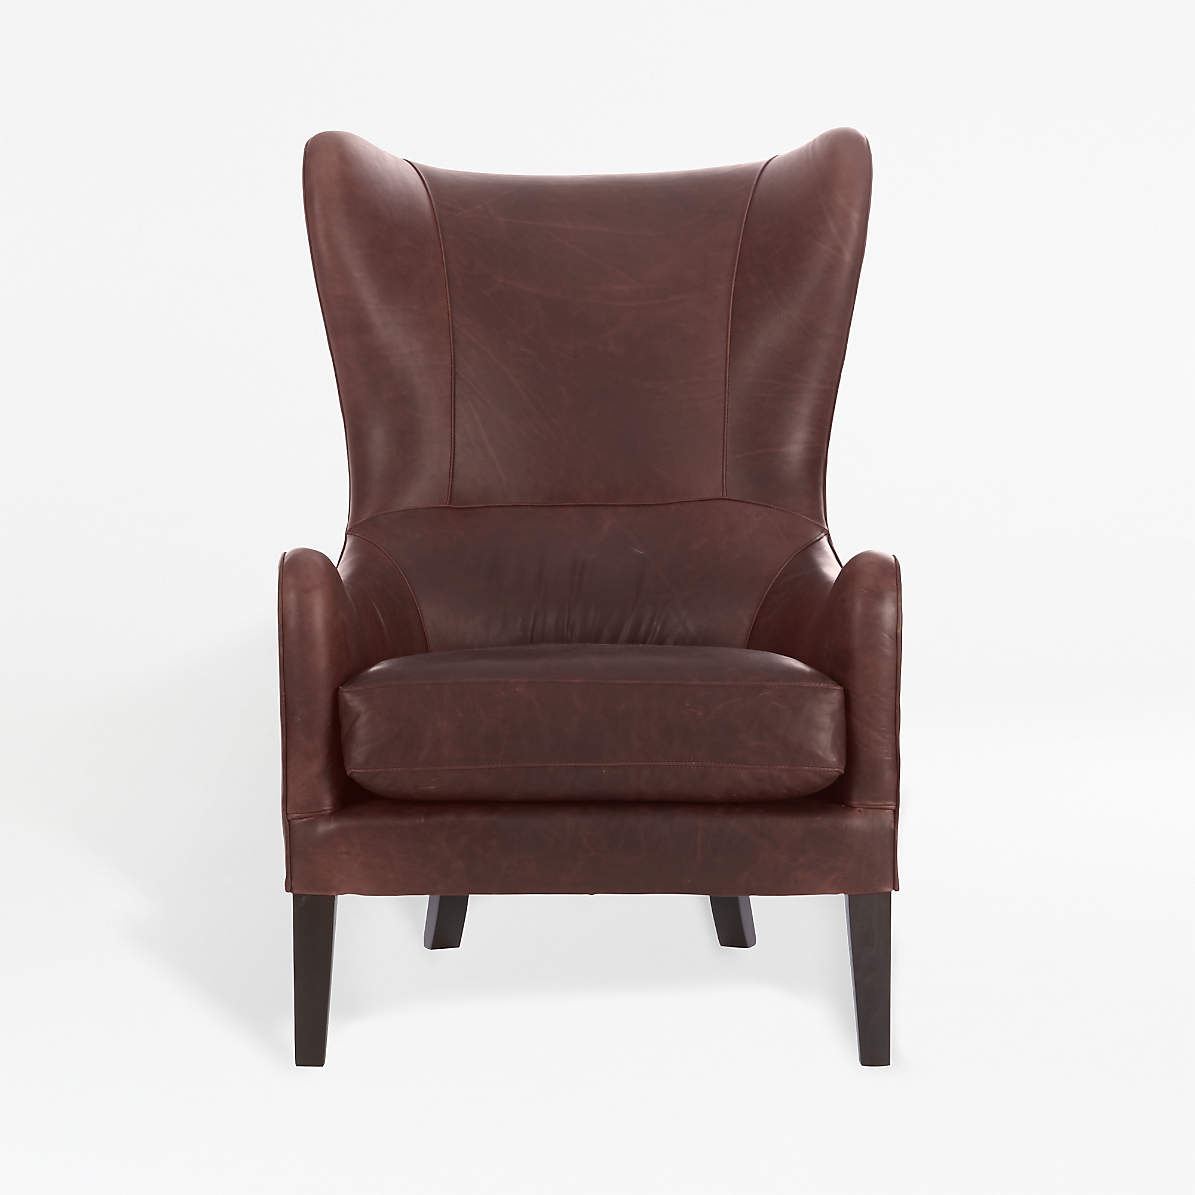 Garbo Leather Wingback Chair Reviews Crate And Barrel